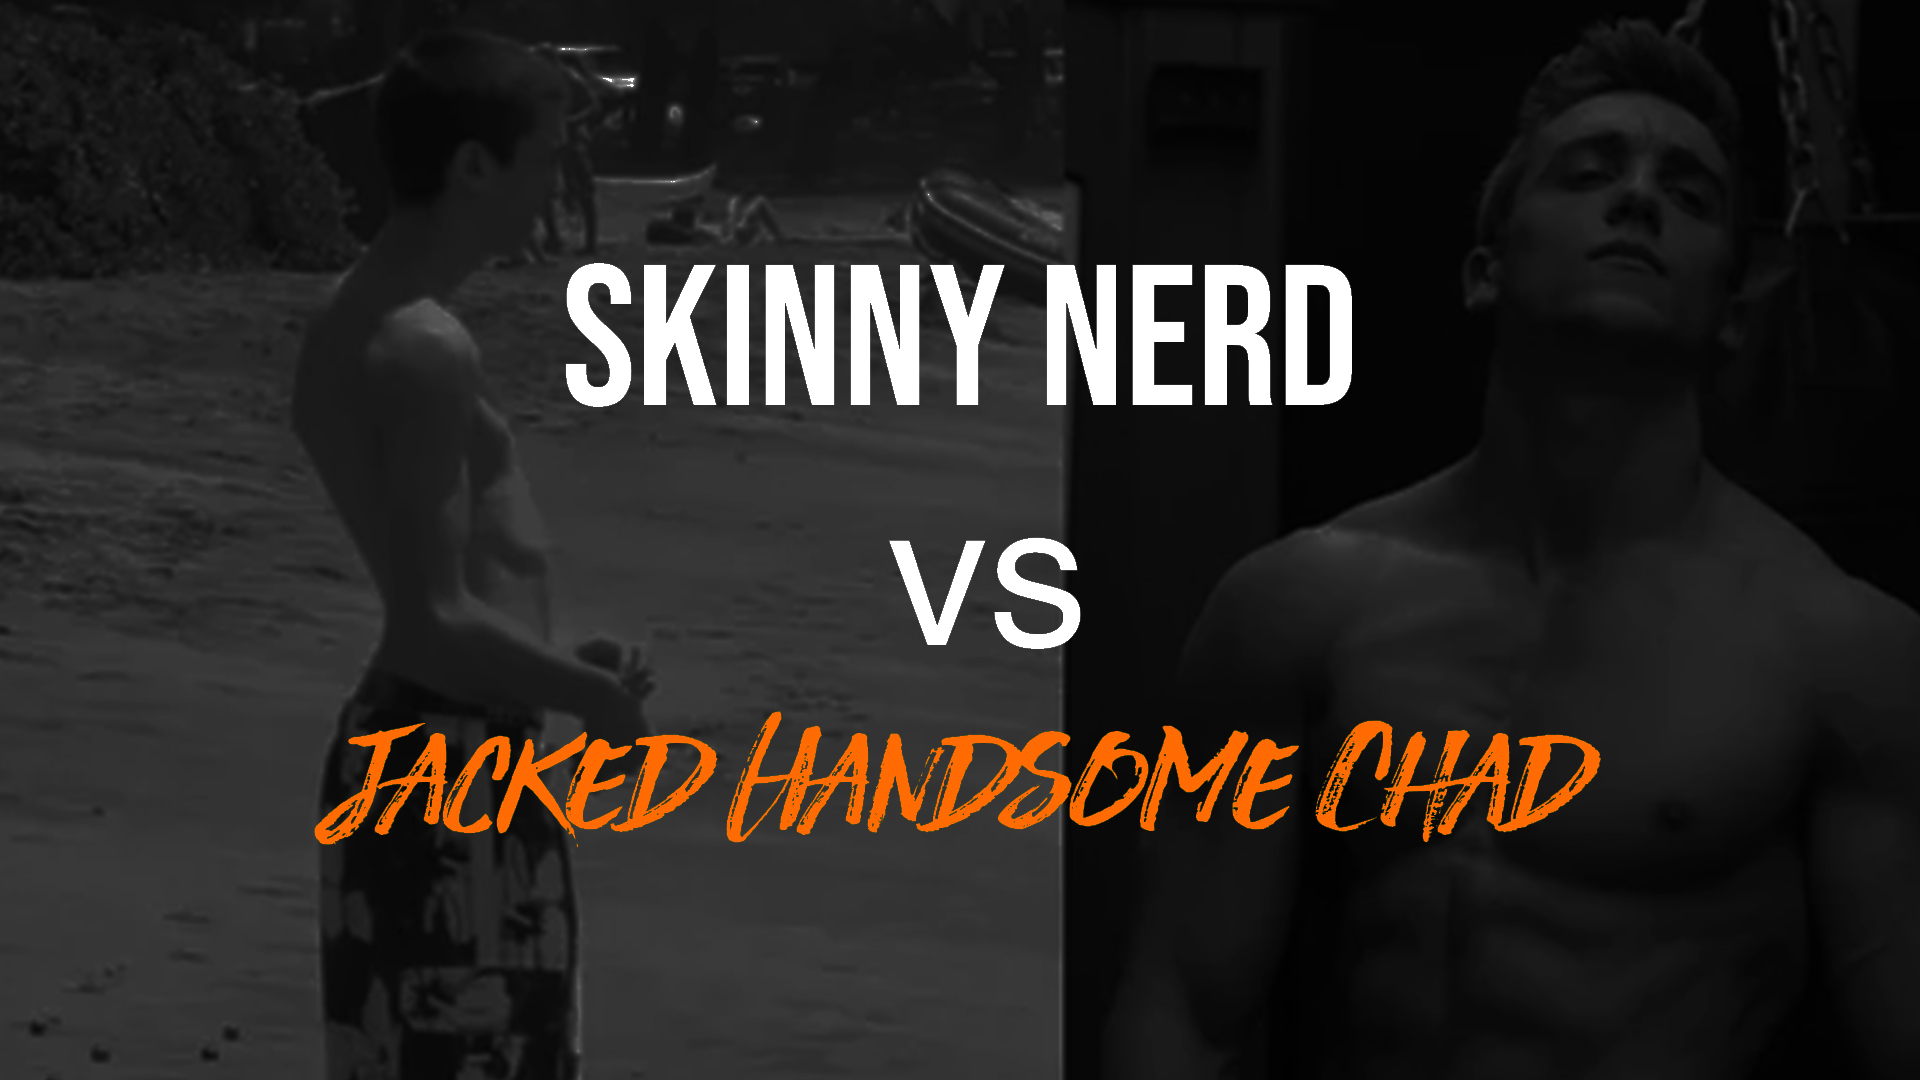 Skinny Nerd vs Jacked Handsome Chad: Who Gets The Girl?